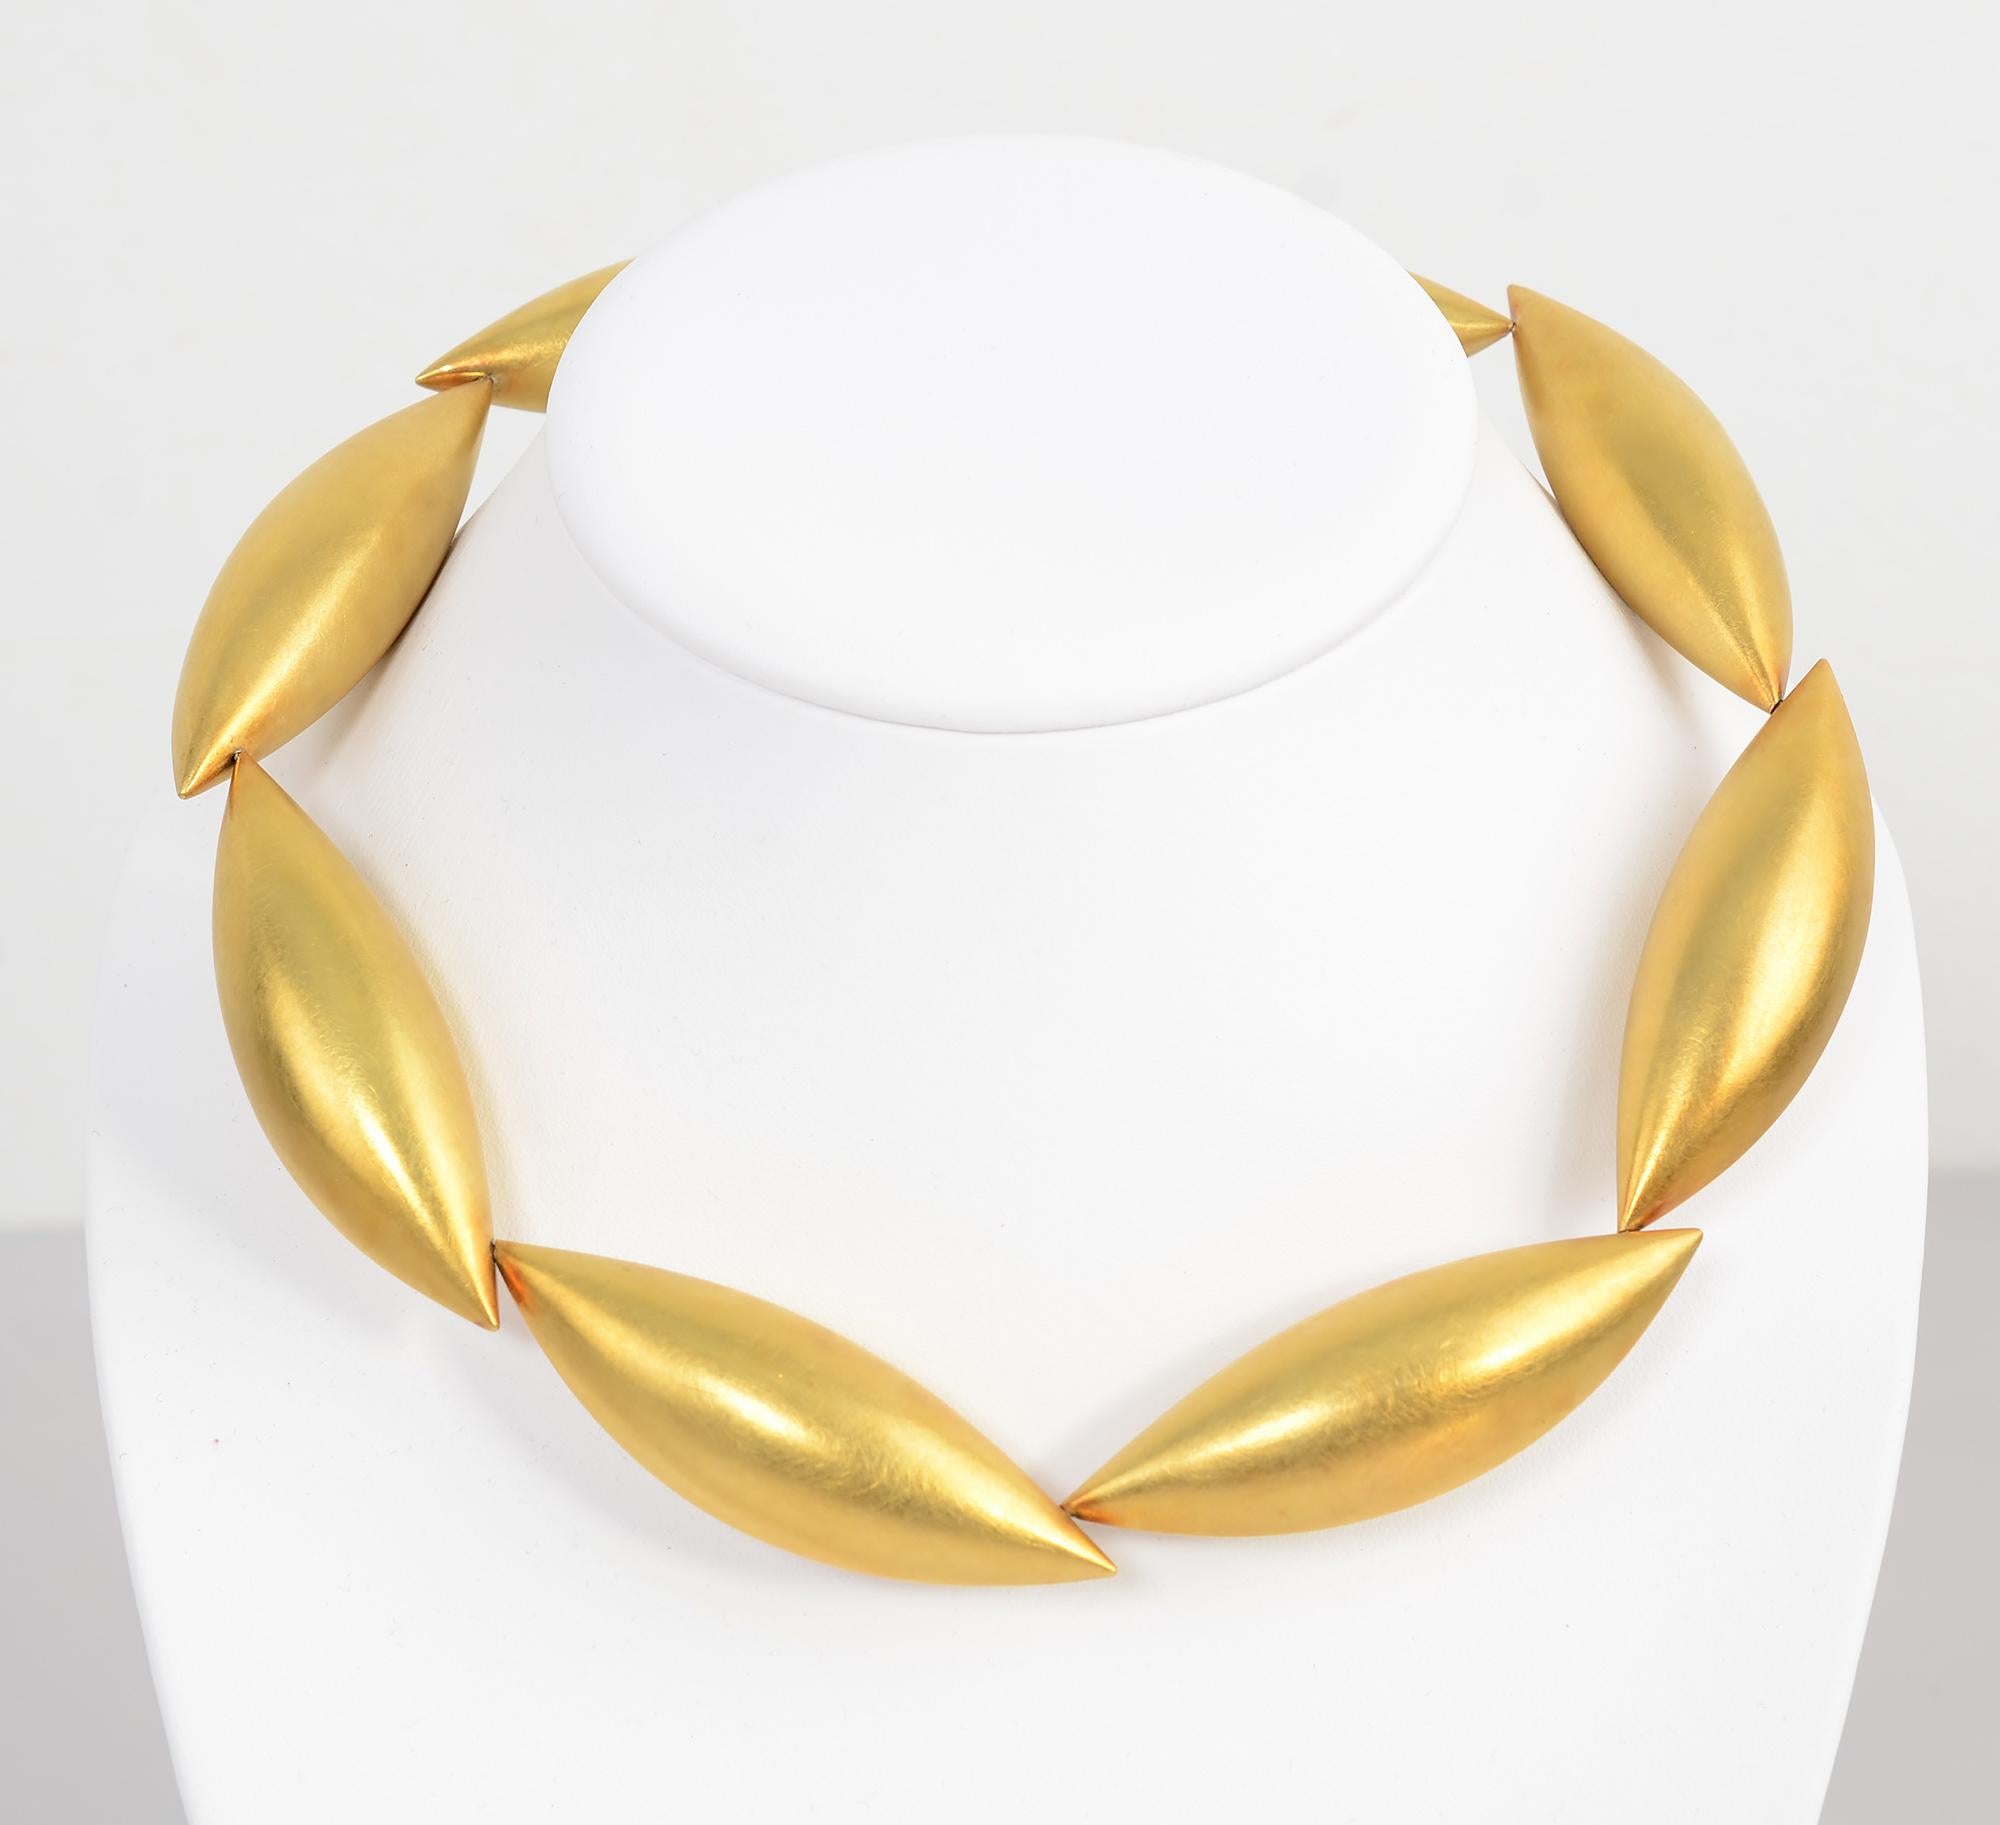 German artist Erich Zimmerman has named this stunning gold choker necklace his Cocoon design. It consists of 8 slightly overlapping elongated tubes with a soft matte finish.  Each tube is 2 9/16 